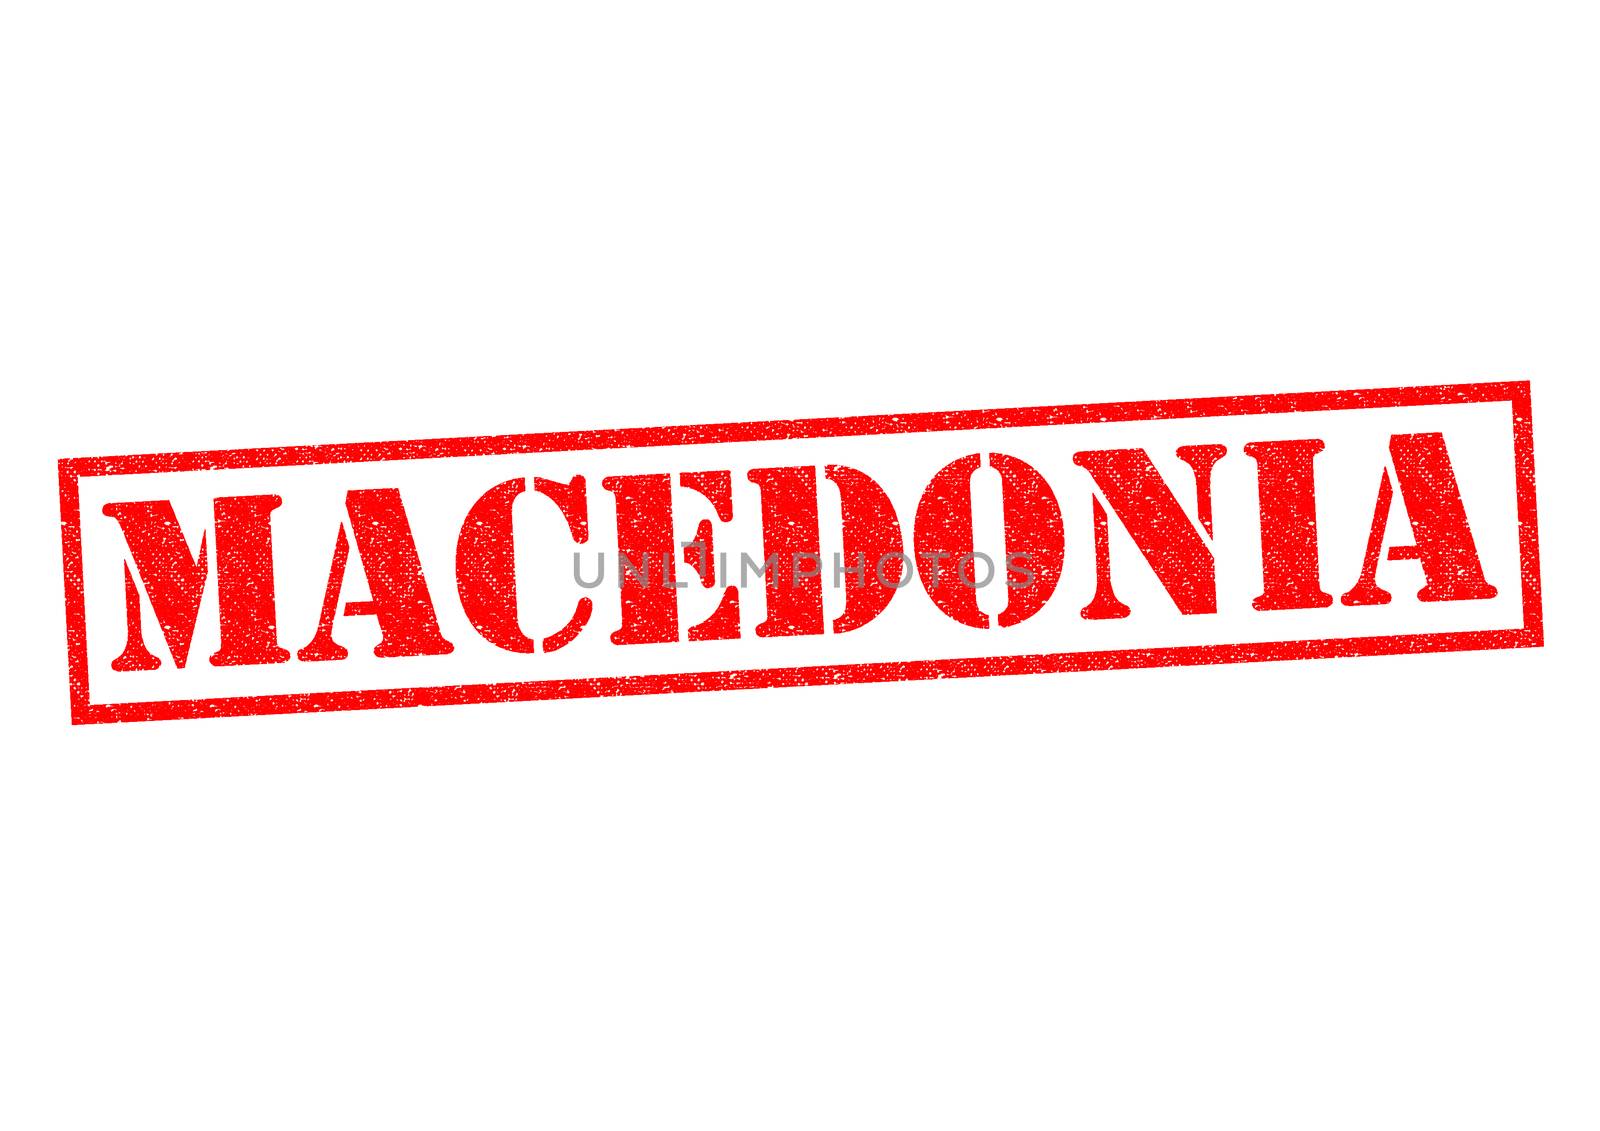 MACEDONIA Rubber Stamp over a white background.